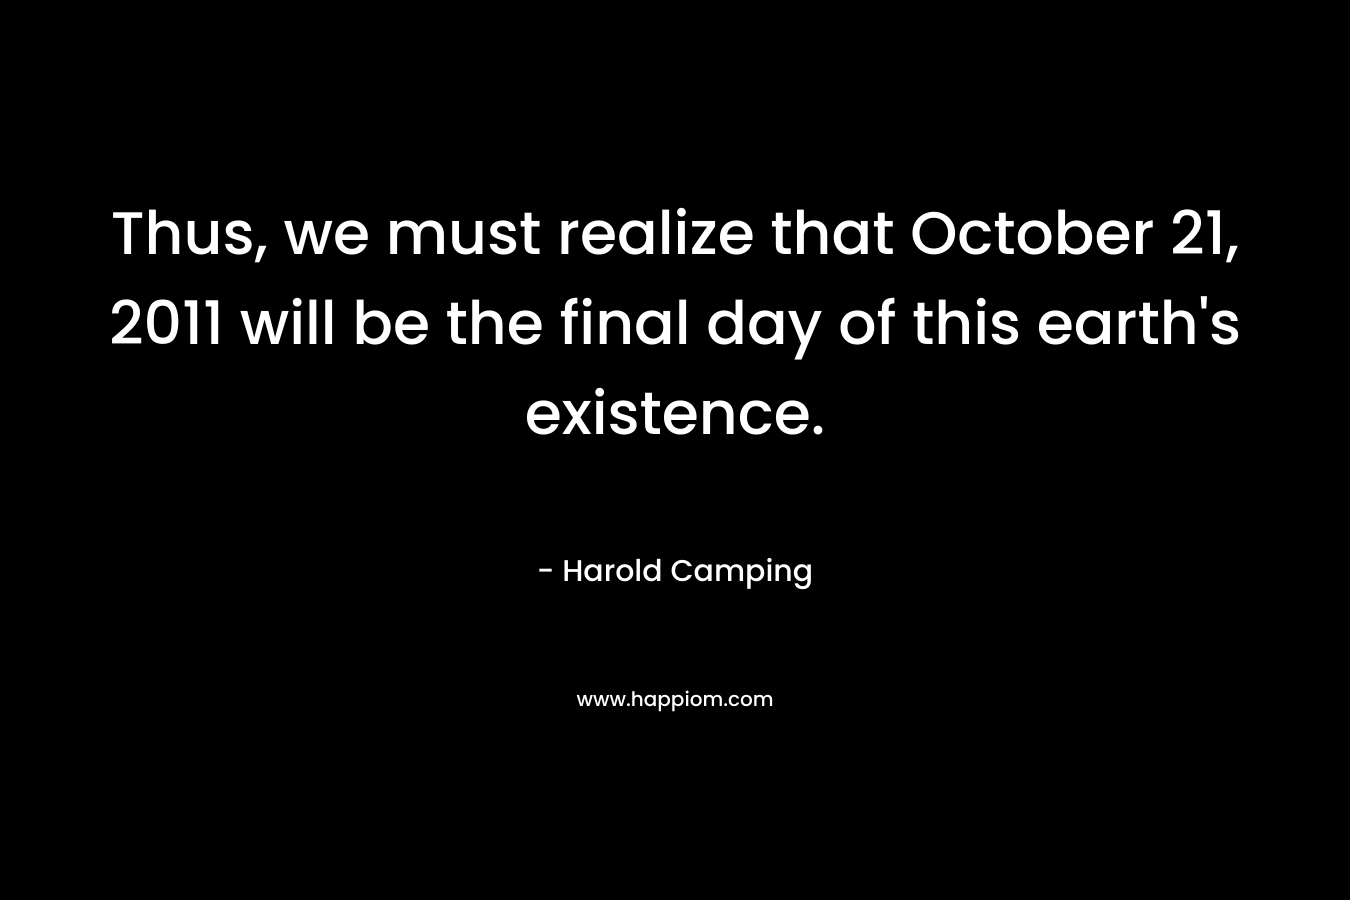 Thus, we must realize that October 21, 2011 will be the final day of this earth’s existence. – Harold Camping